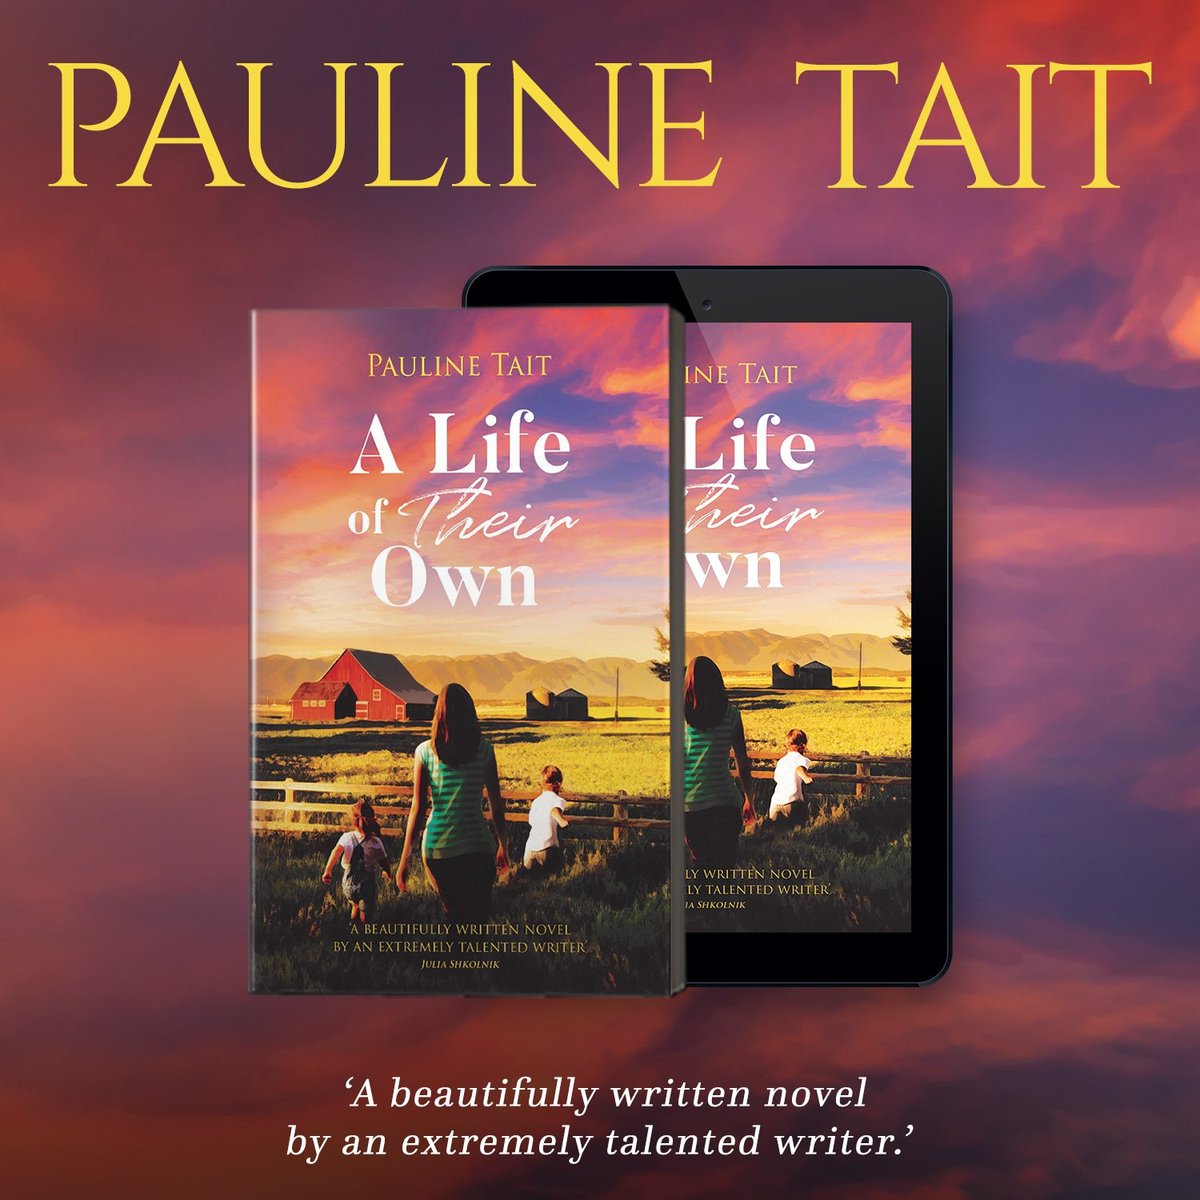 'Pauline Tait is a spellbinding storyteller whose ability to transport readers inside the twists and turns of Kate’s plight leaves readers breathless. She word-paints, in vivid detail, the splendour of the Colorado landscape, and she creates characters who are raw and real.'